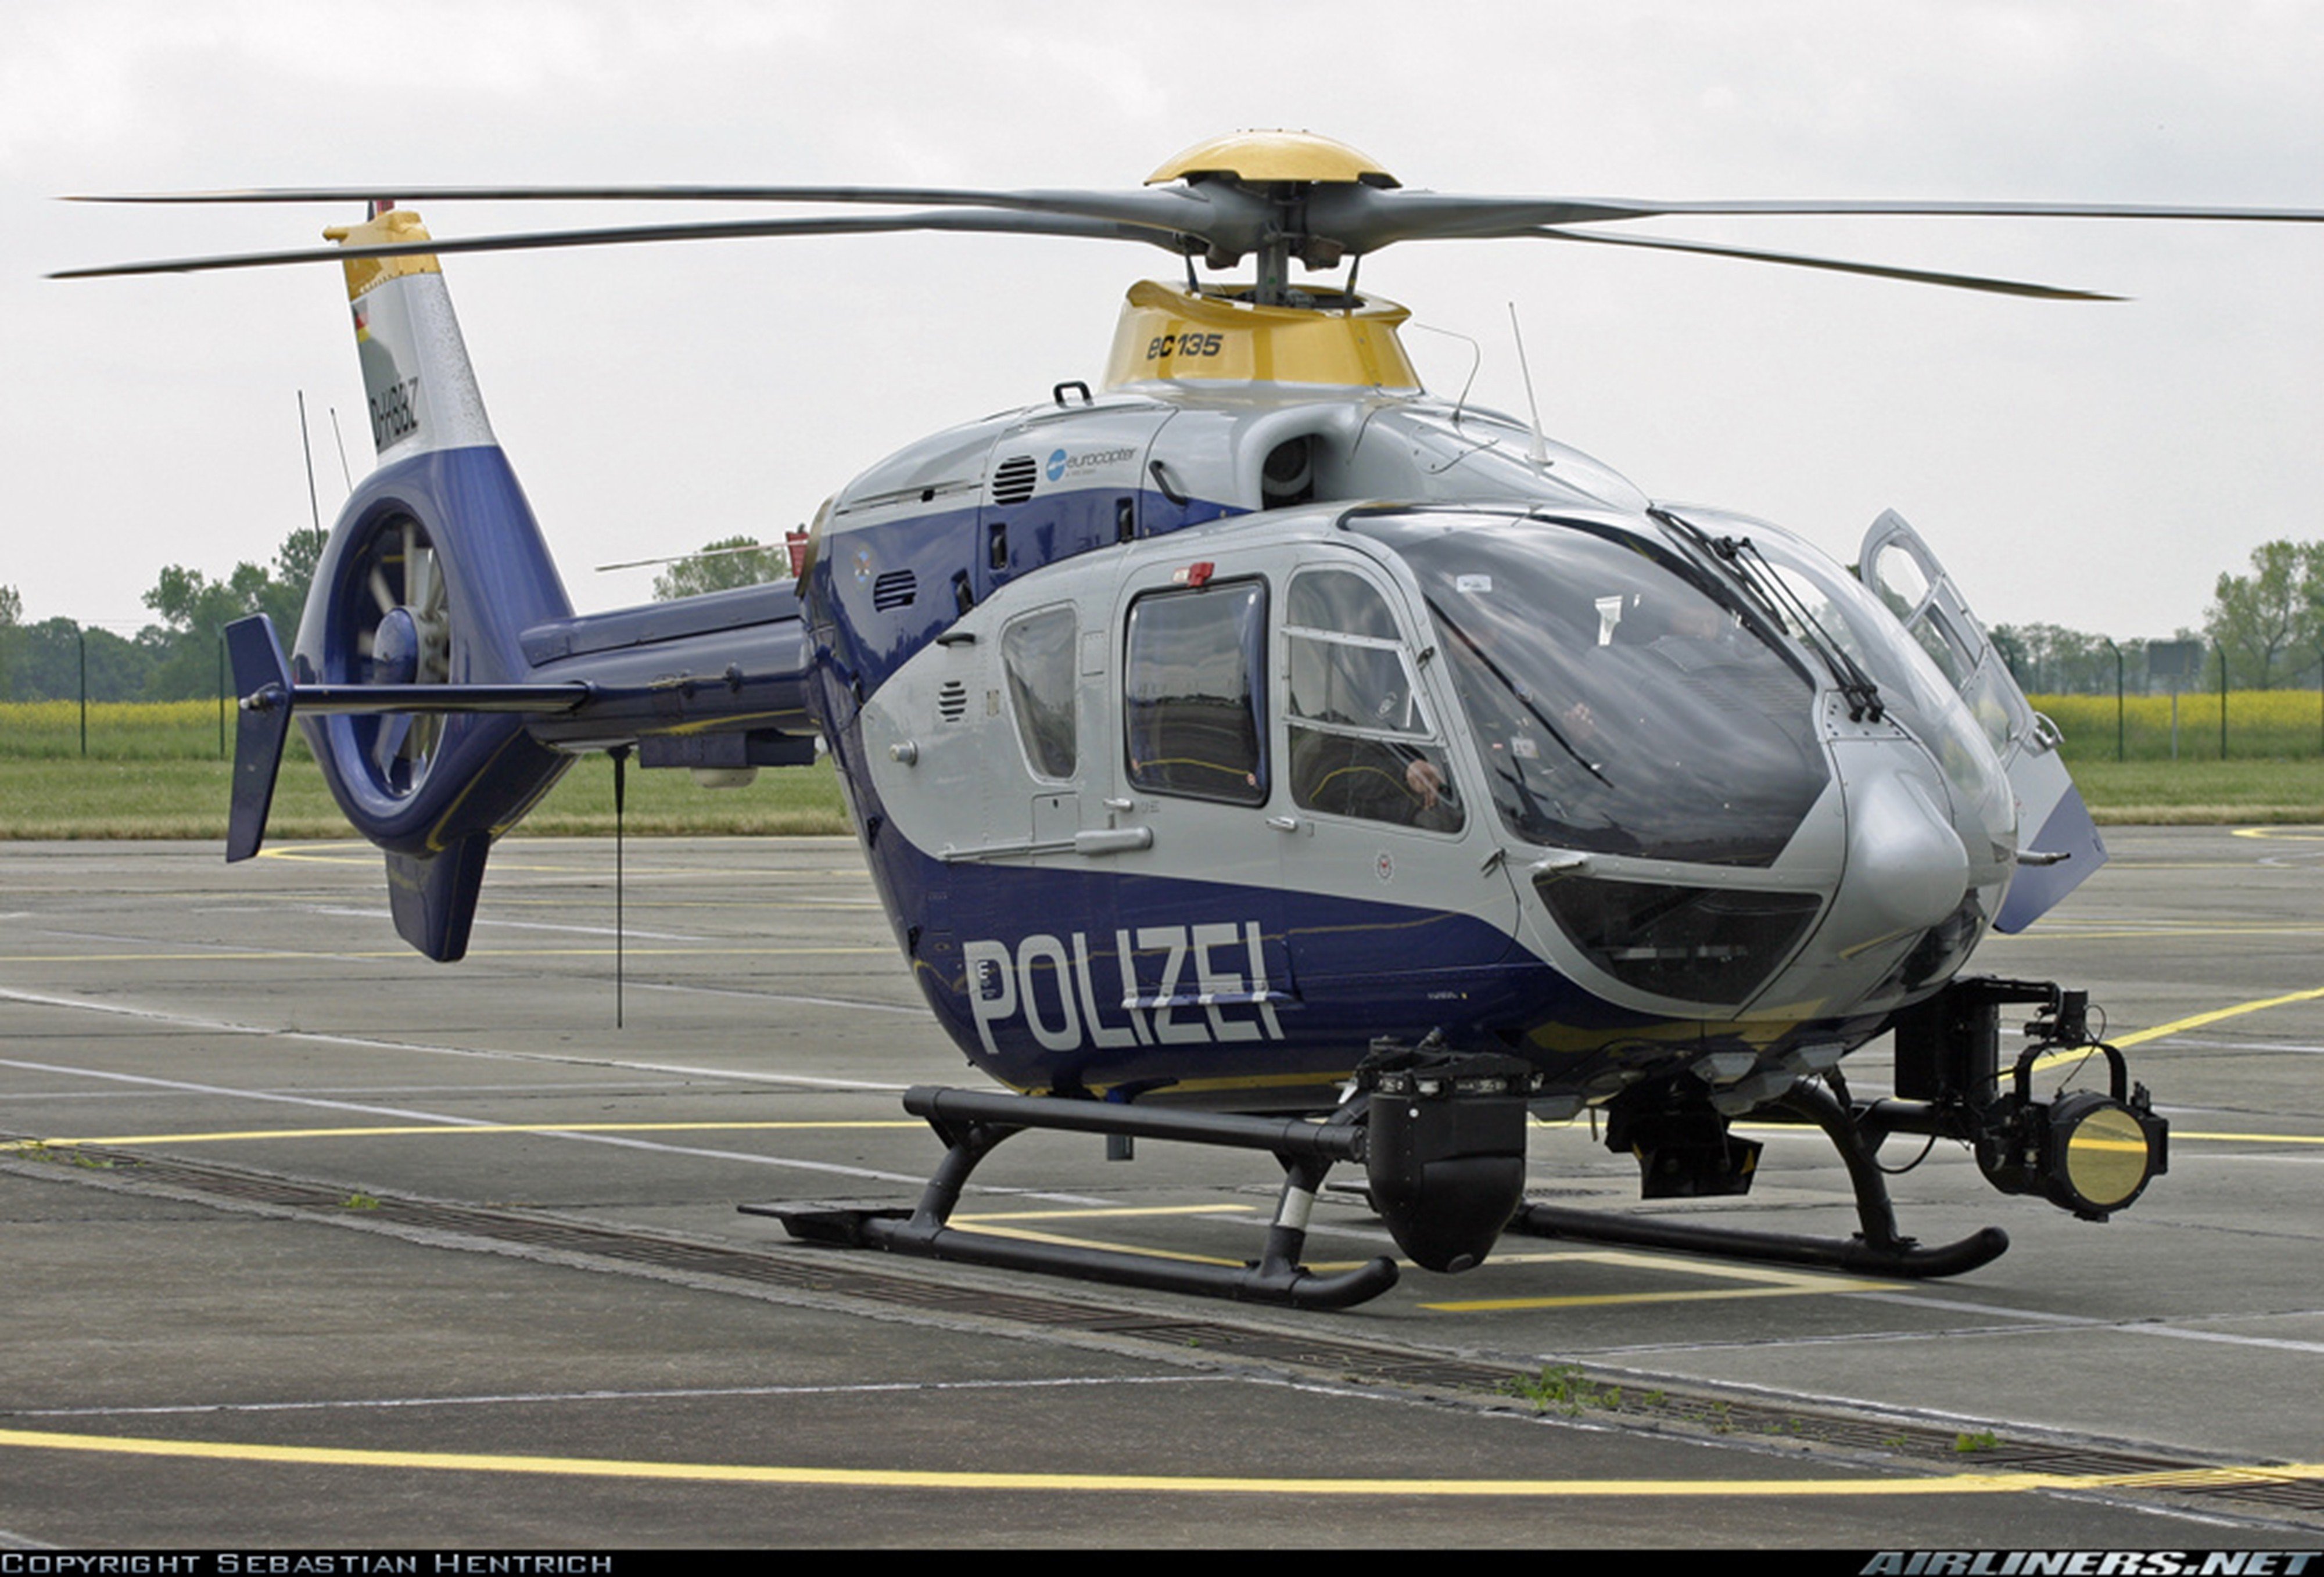 helicopter, Aircraft, Vehicle, Police, Germany, Eurocopter, Ec 135 Wallpaper